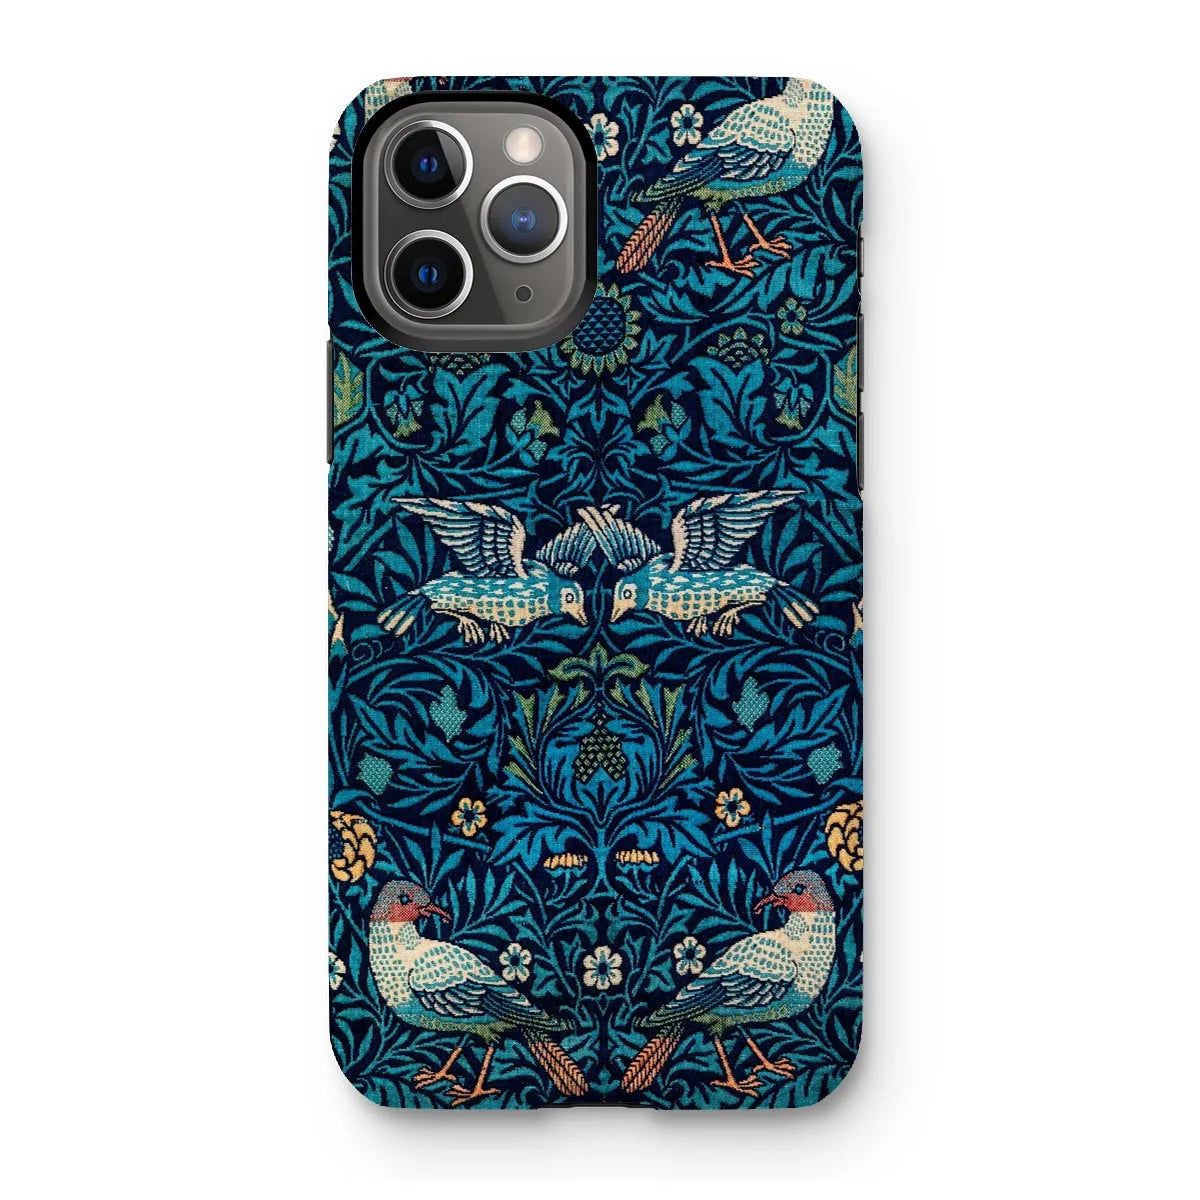 Birds By William Morris - Aesthetic Pattern Art Phone Case - Iphone 11 Pro / Matte - Mobile Phone Cases - Aesthetic Art